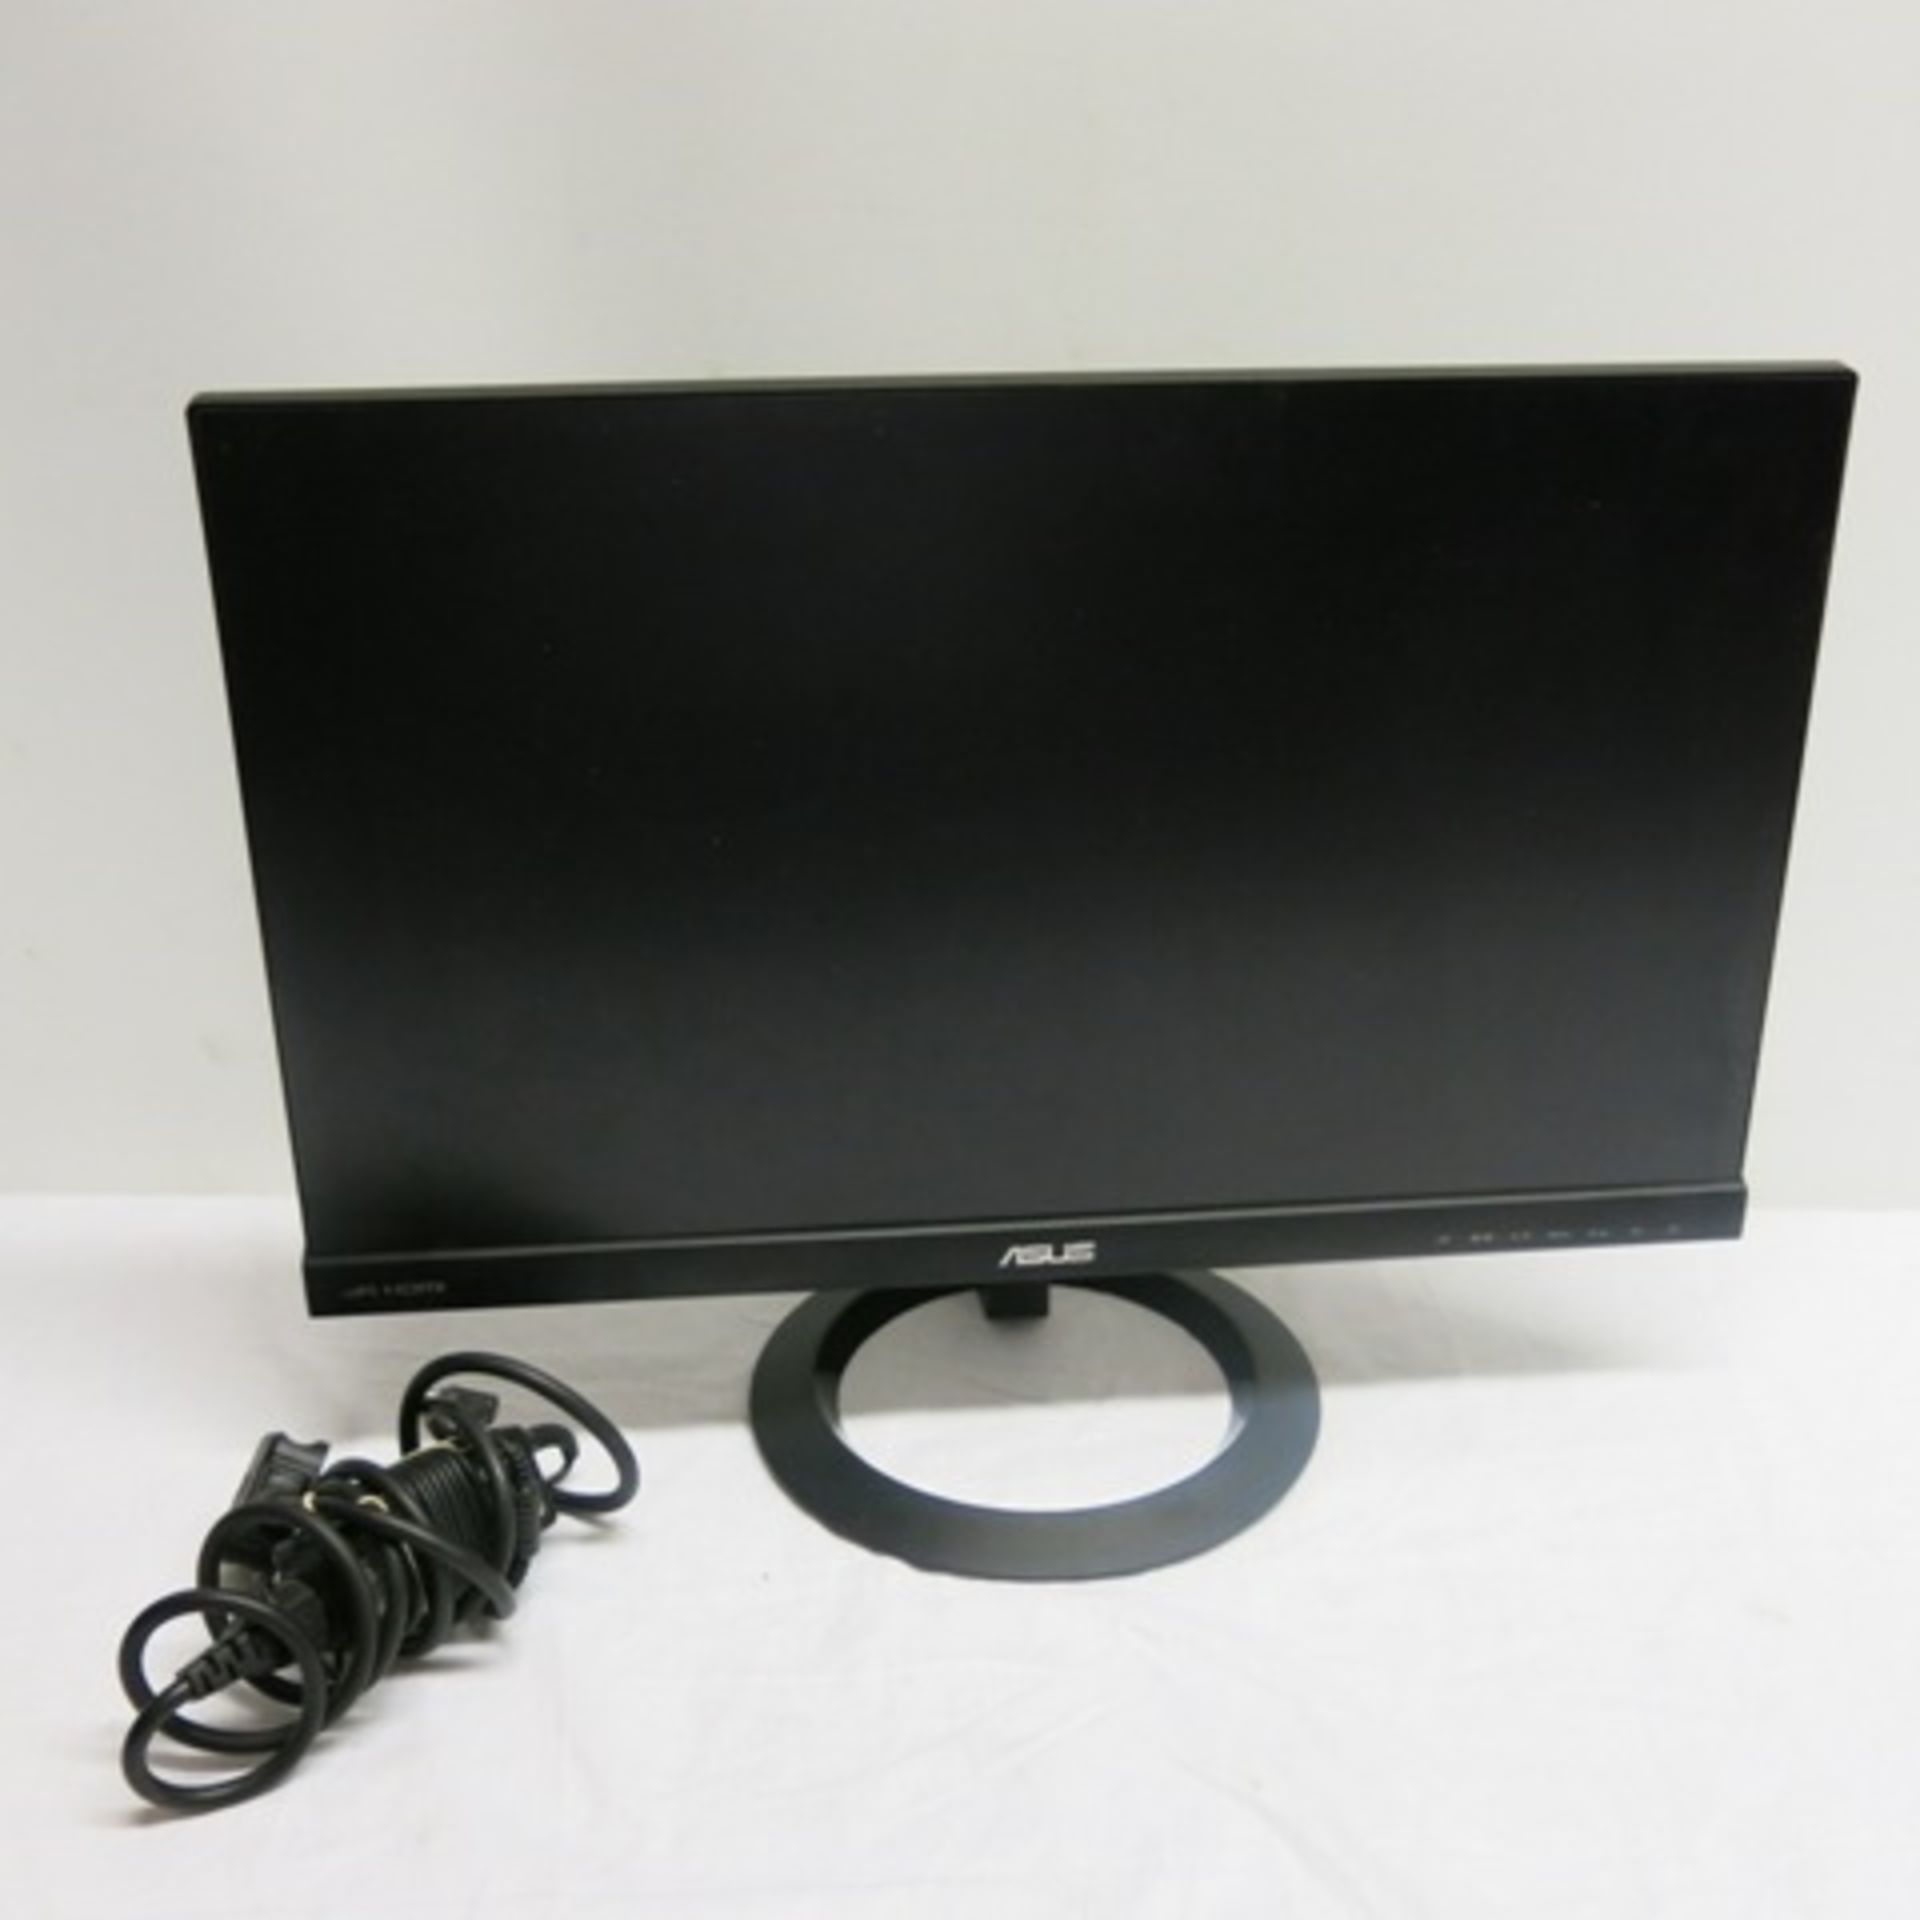 Asus 22" LCD Monitor, Model VX229 with Power Supply